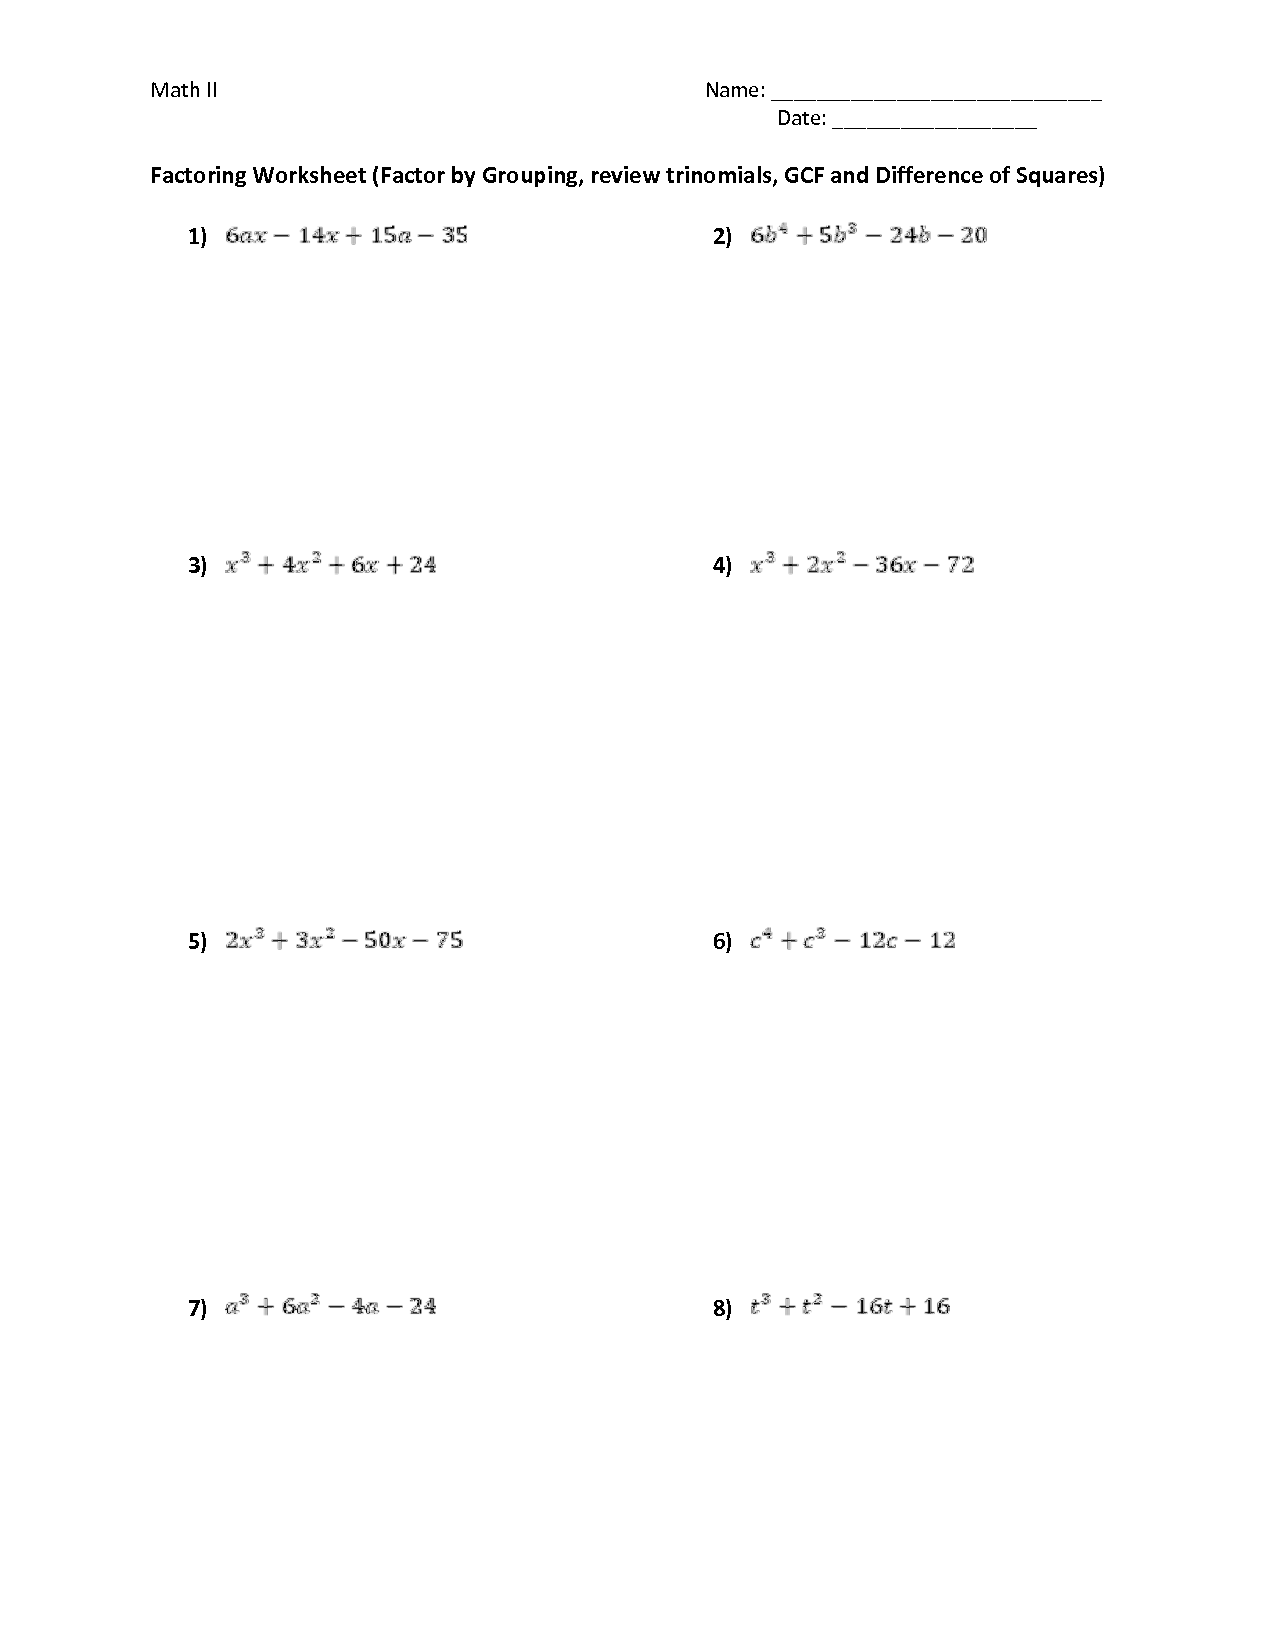 Factoring by Grouping Worksheet Image